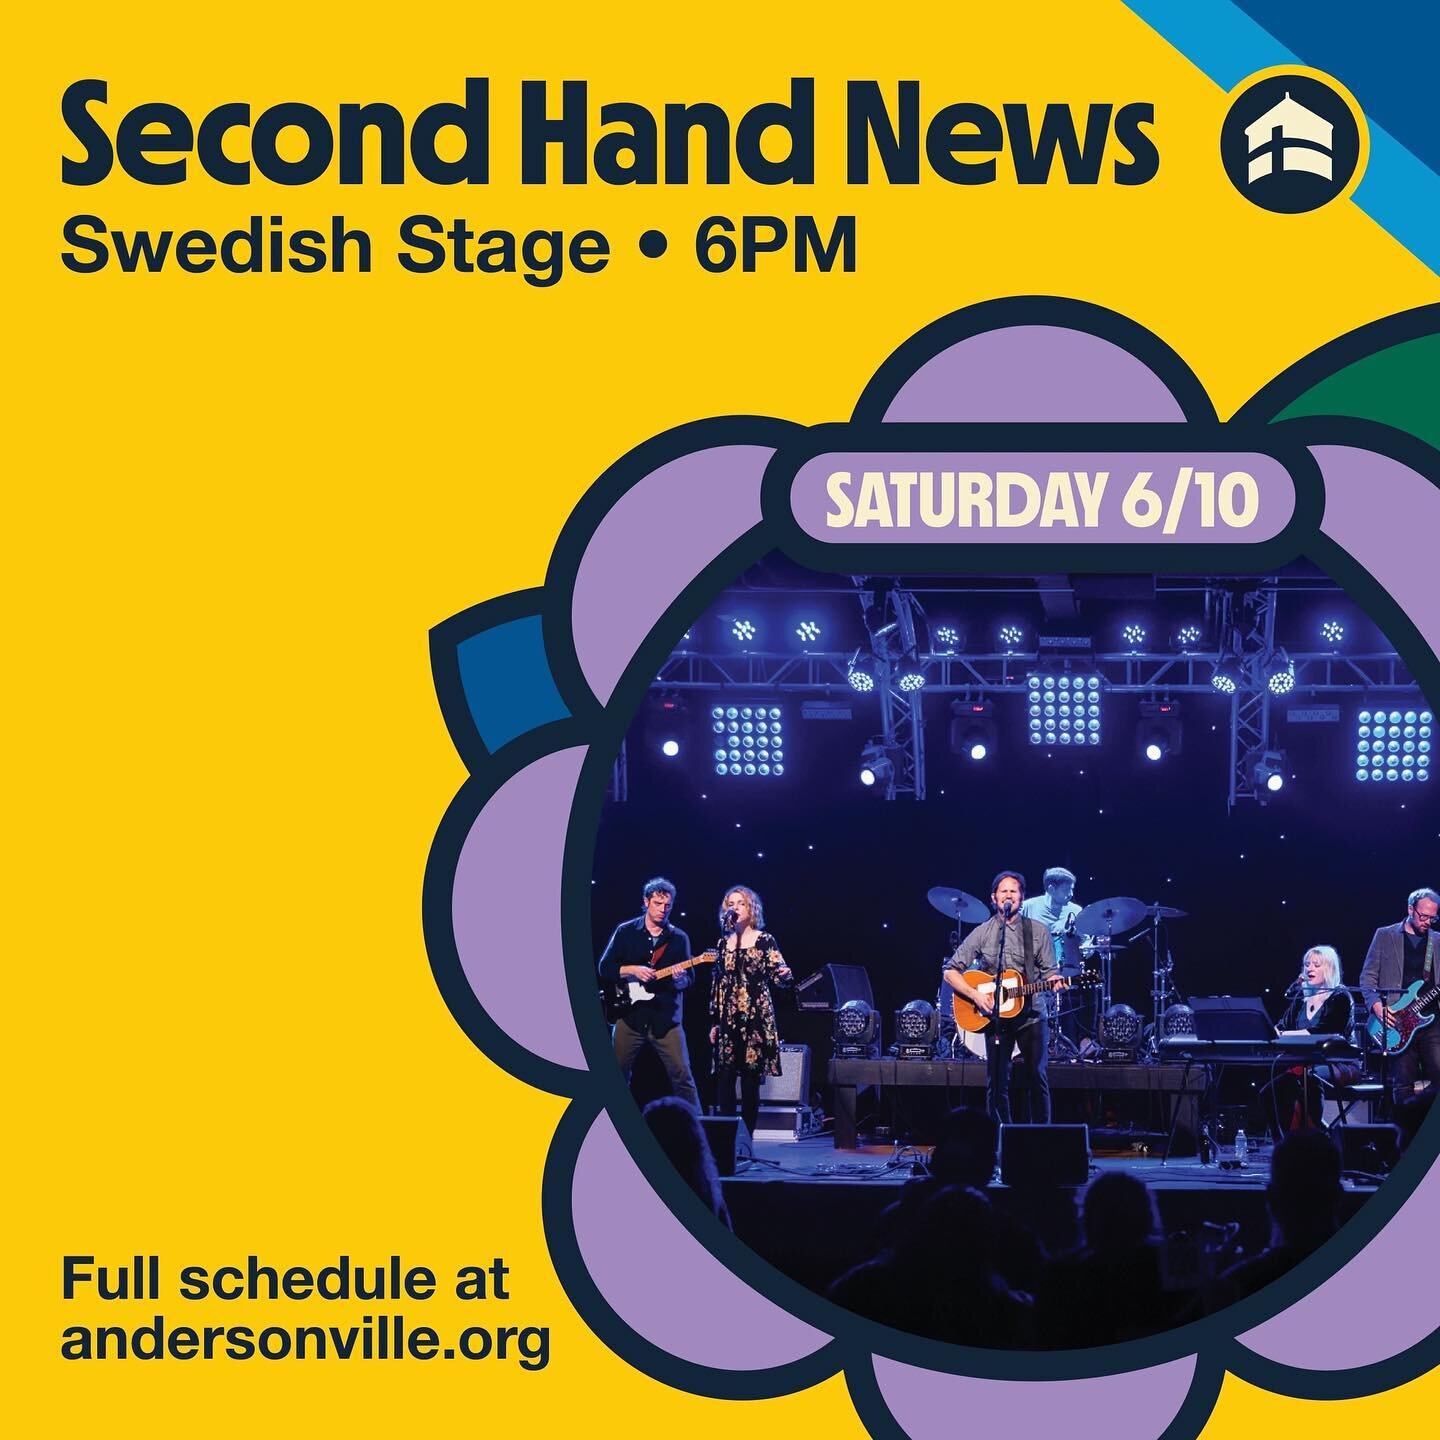 Midsommarfest // 6.11.23 // 6PM

We&rsquo;ll see you at the Swedish Stage this Saturday!! Come enjoy the summer air with us as we jam to some of Fleetwood Mac&rsquo;s best tunes! 🤘

.
.
.

#midsommarfestandersonville #chicago #livemusic #stevienicks